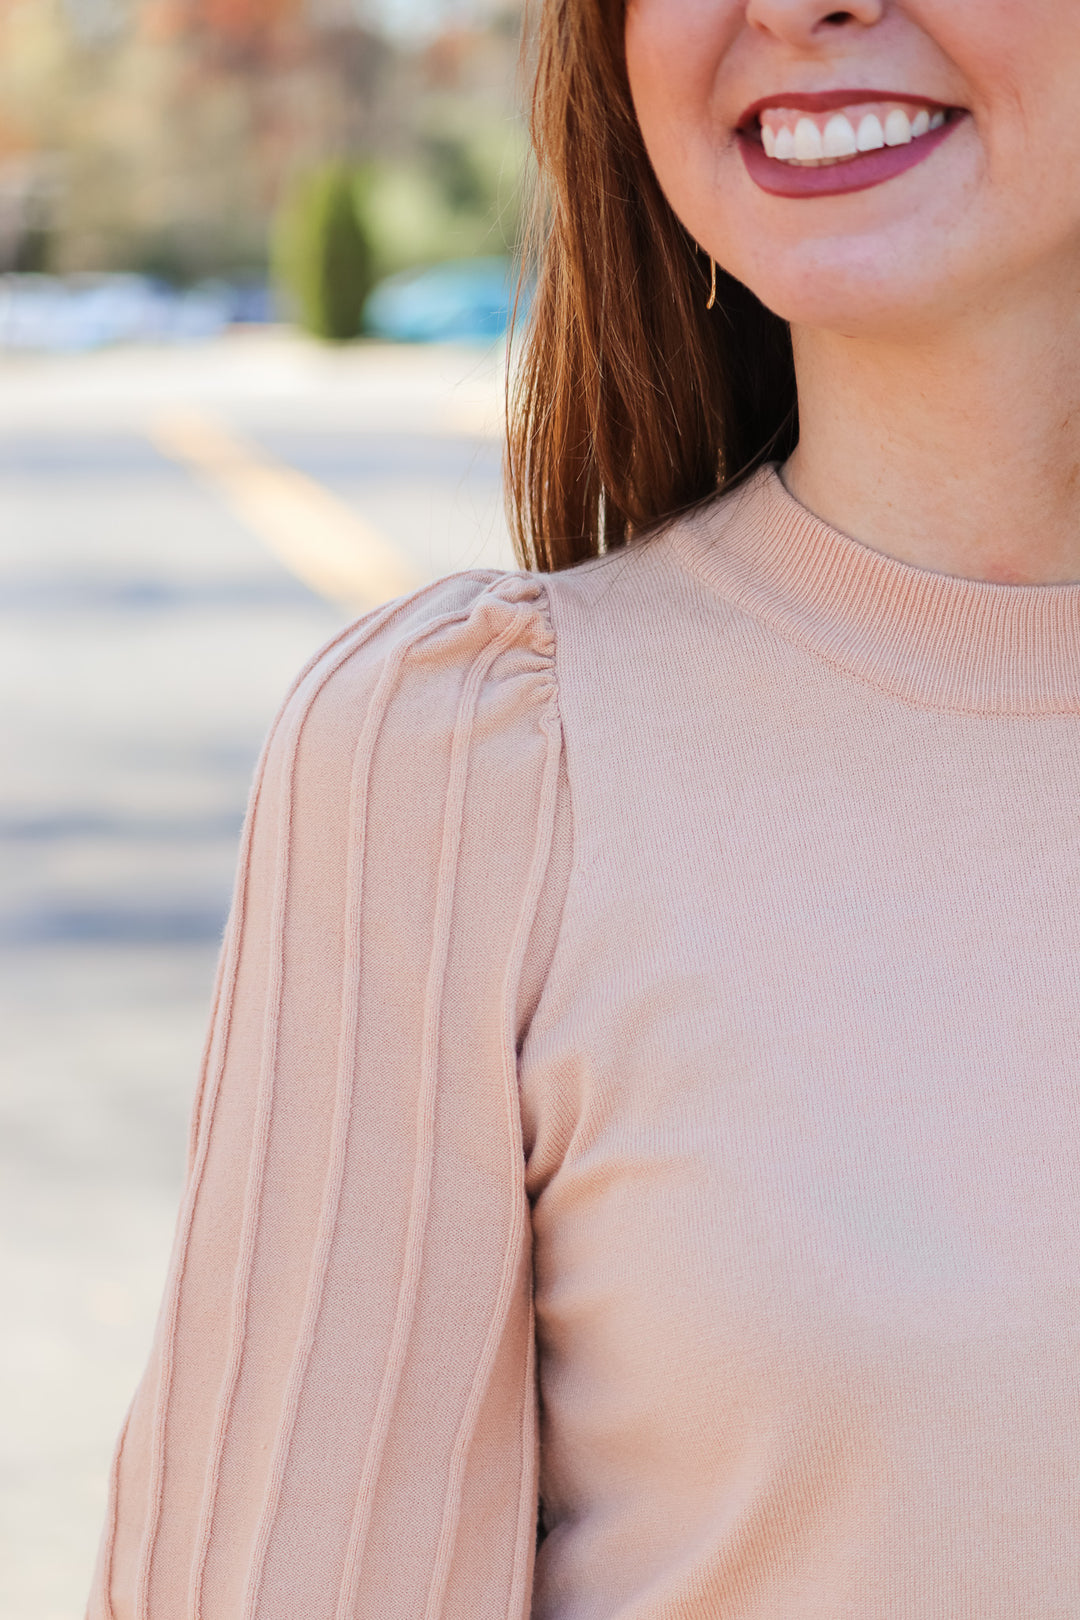 A closeup of the shoulder of a woman wearing an oat colored detailed long sleeve sweater.